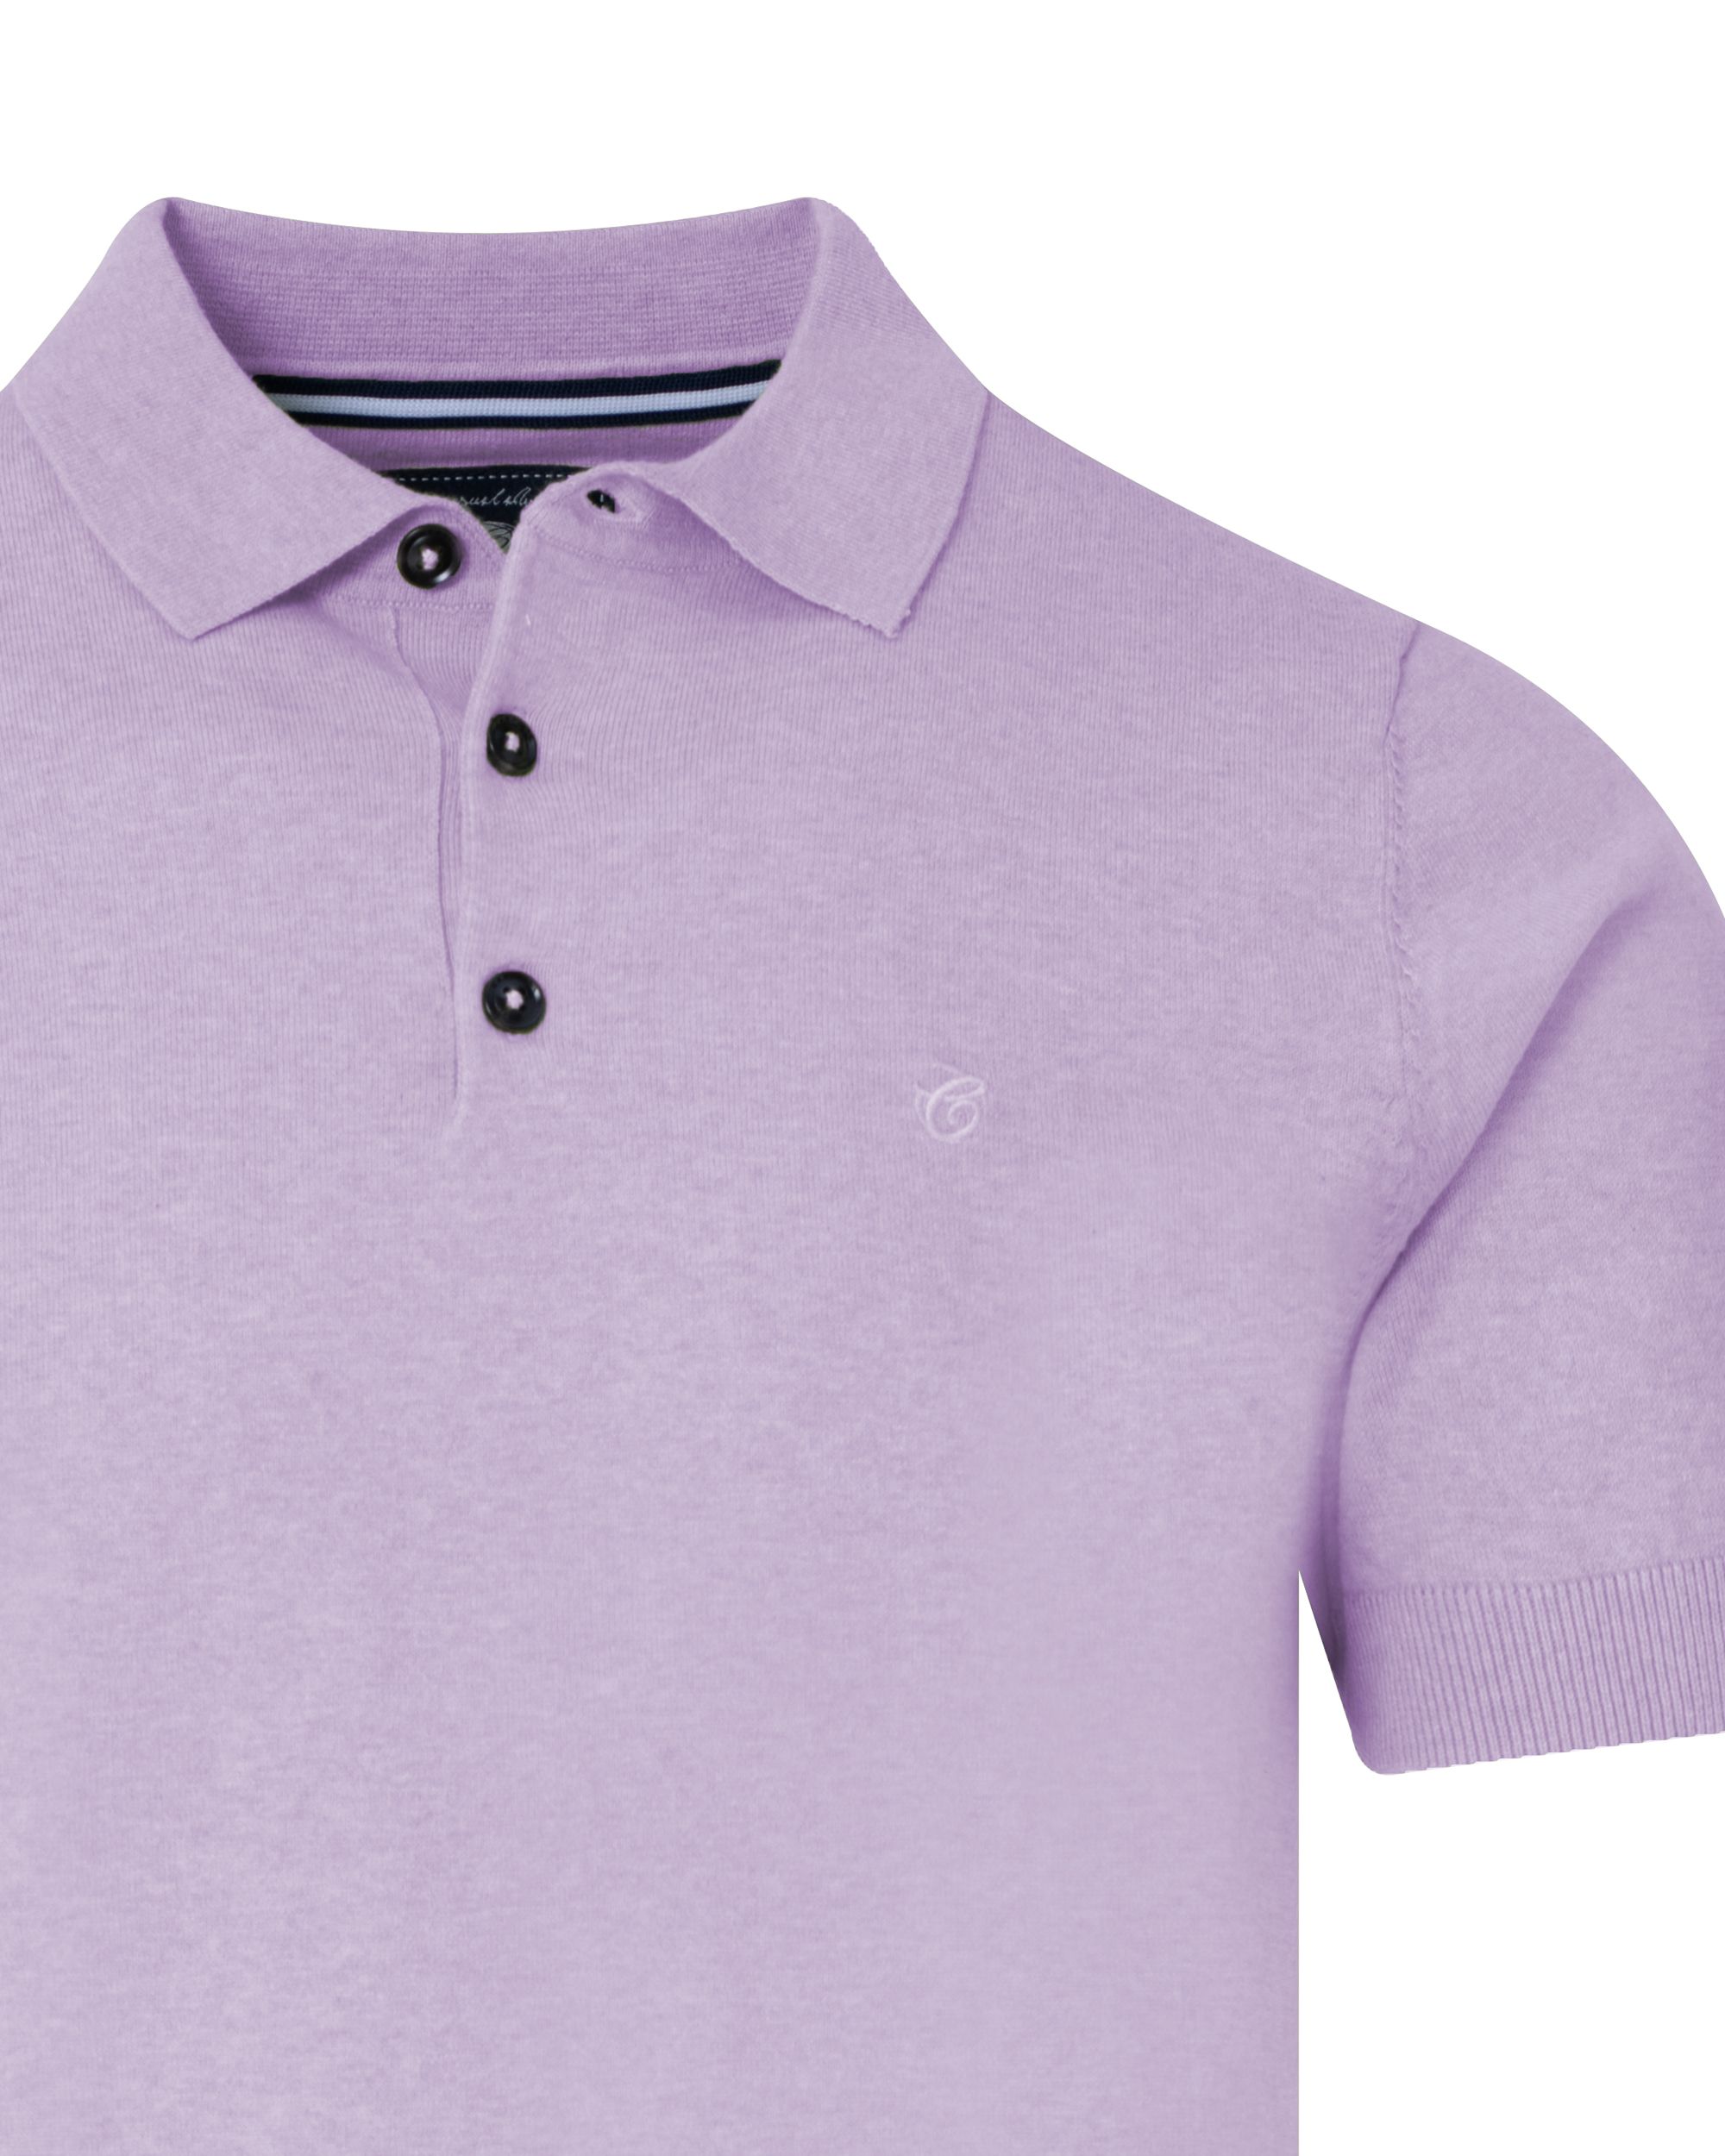 Campbell Classic Steed Polo KM Lavender Frost 090569-005-L